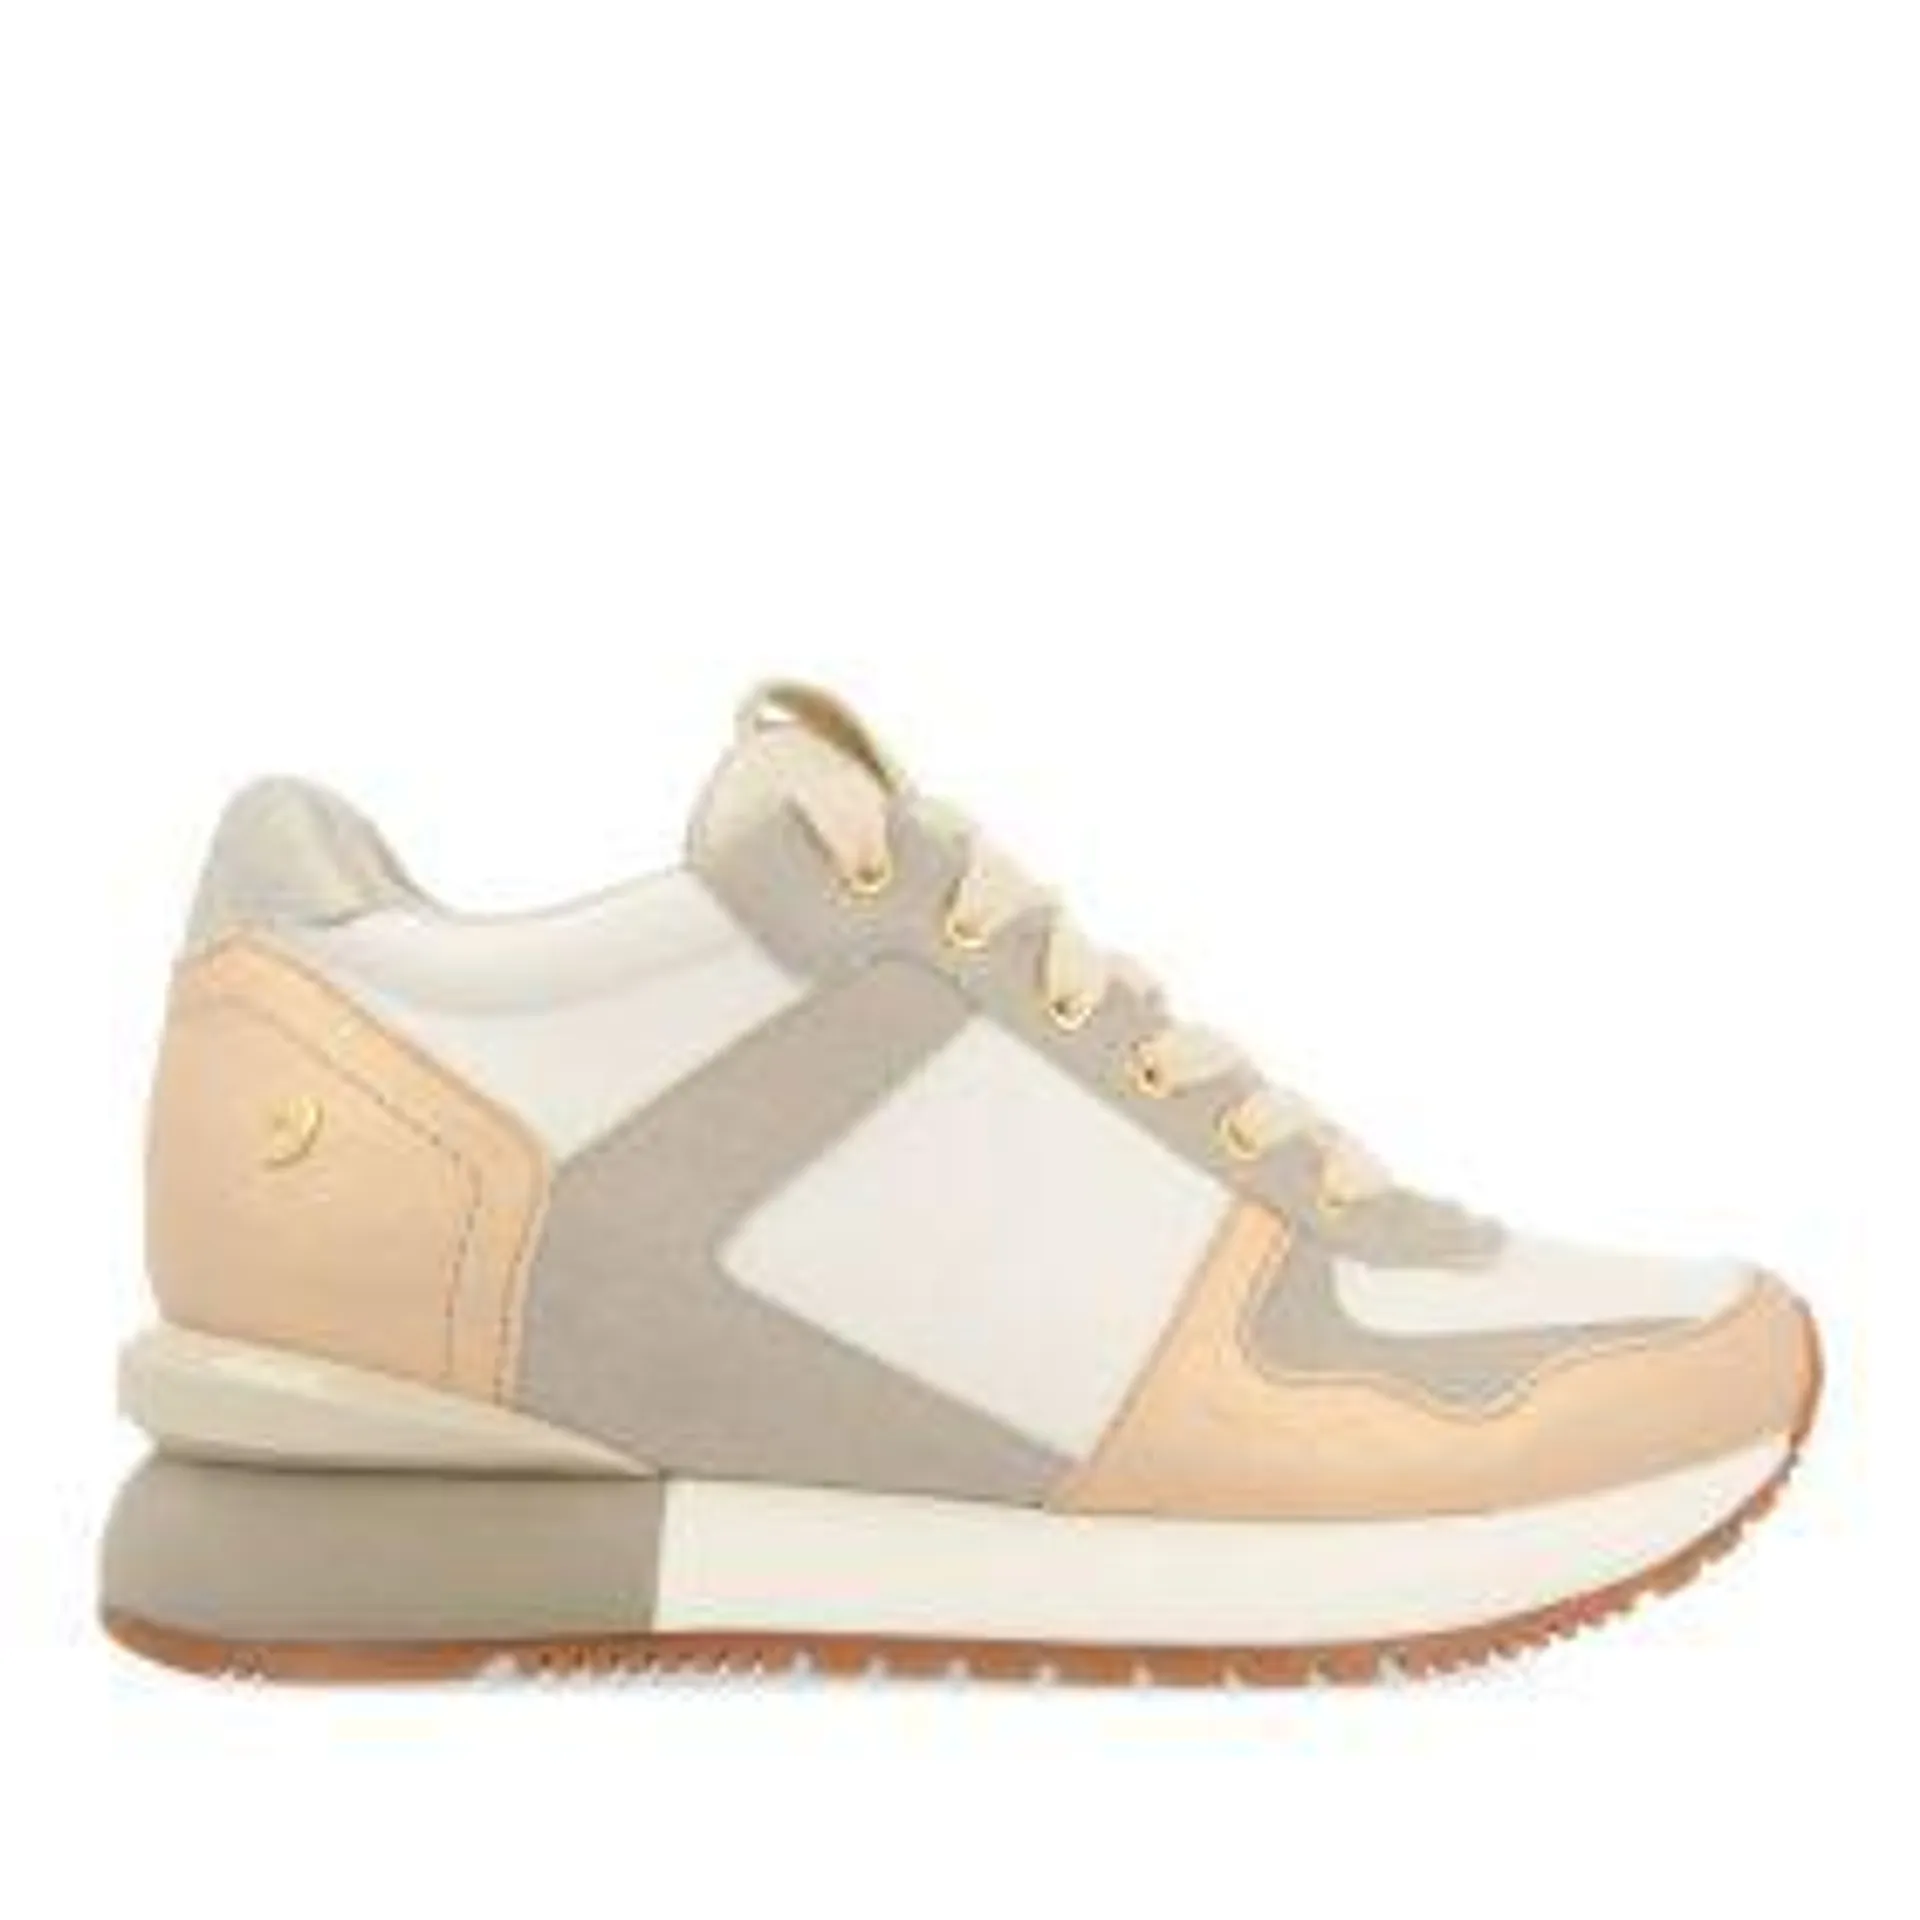 Hallenfels women's off-white sneakers with inner wedges and metallic pieces